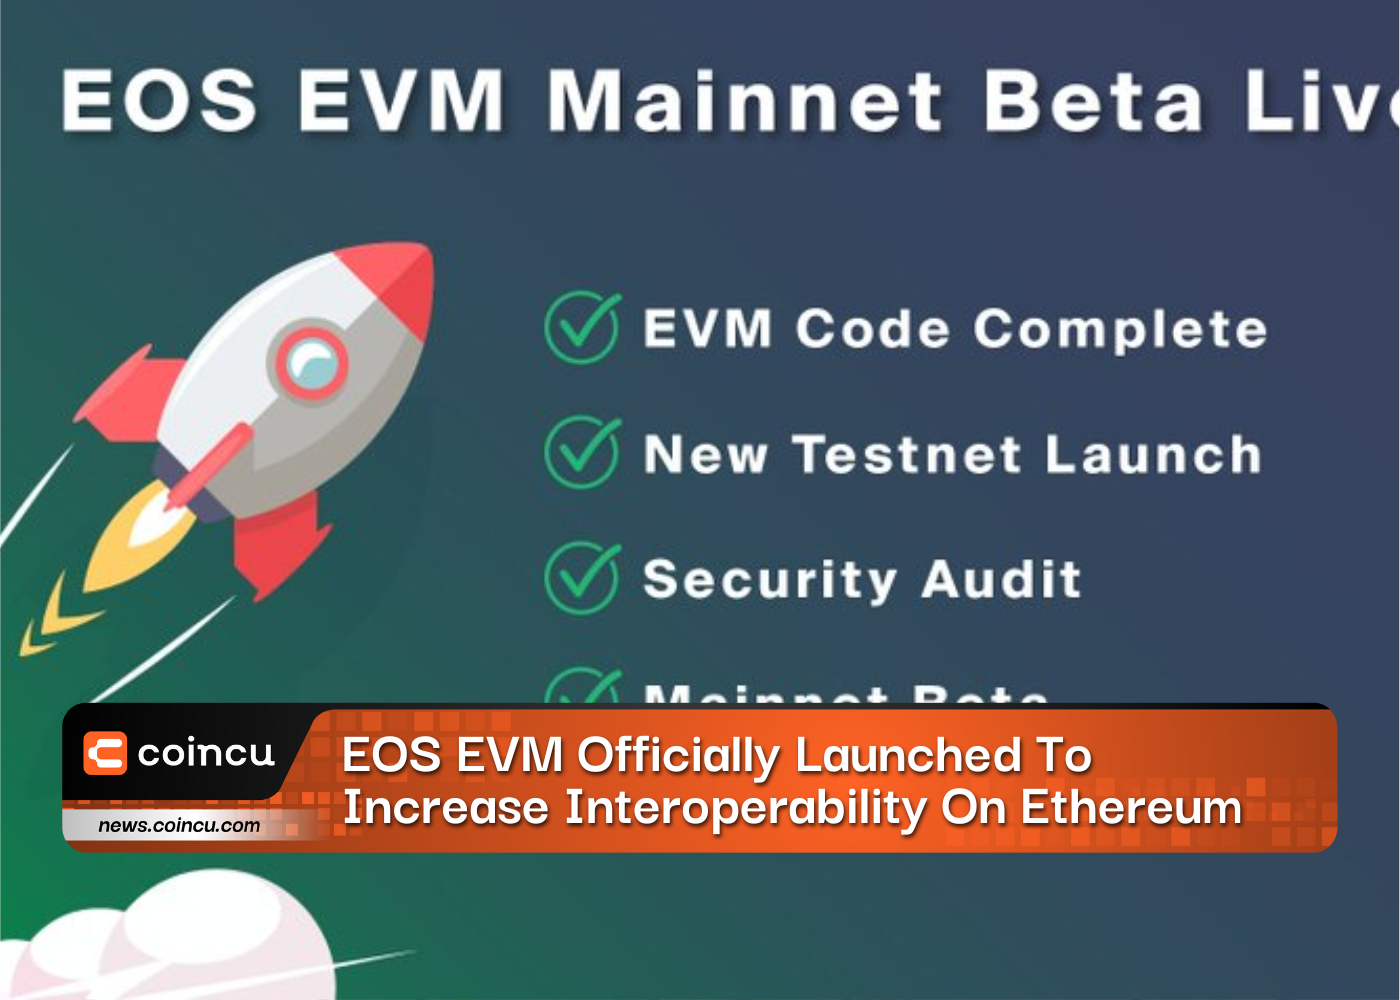 EOS EVM Officially Launched To Increase Interoperability On Ethereum